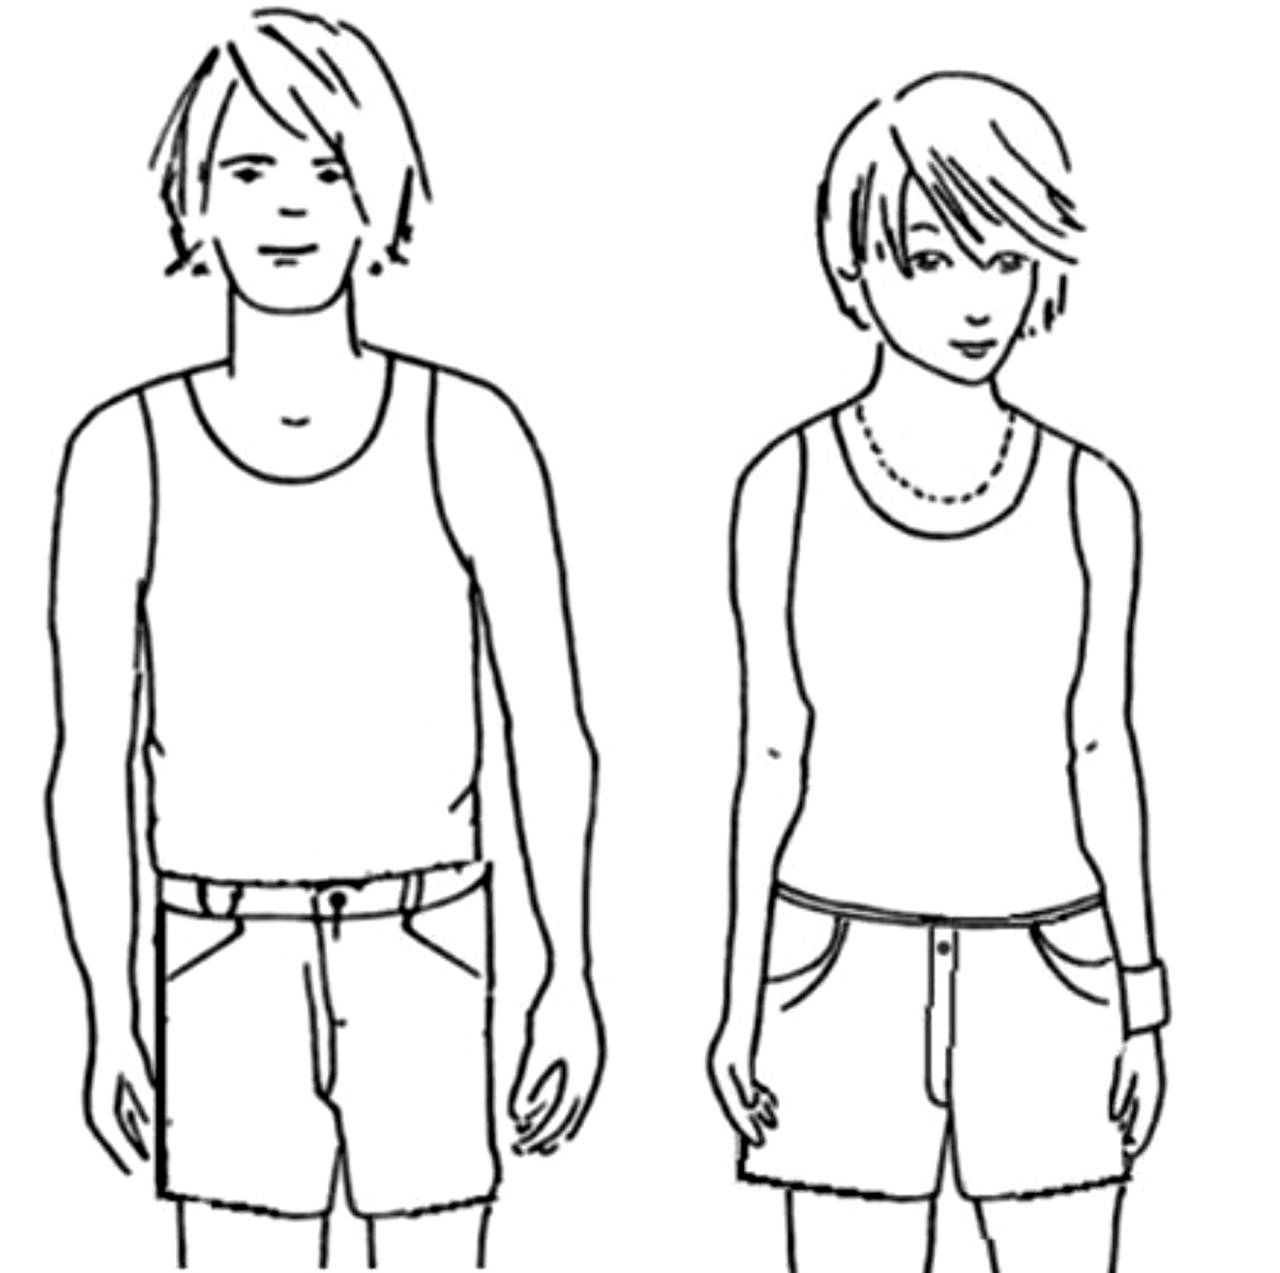 The dress code requires quick service employees to wear clothing that covers the upper and lower body. (City of Everett)